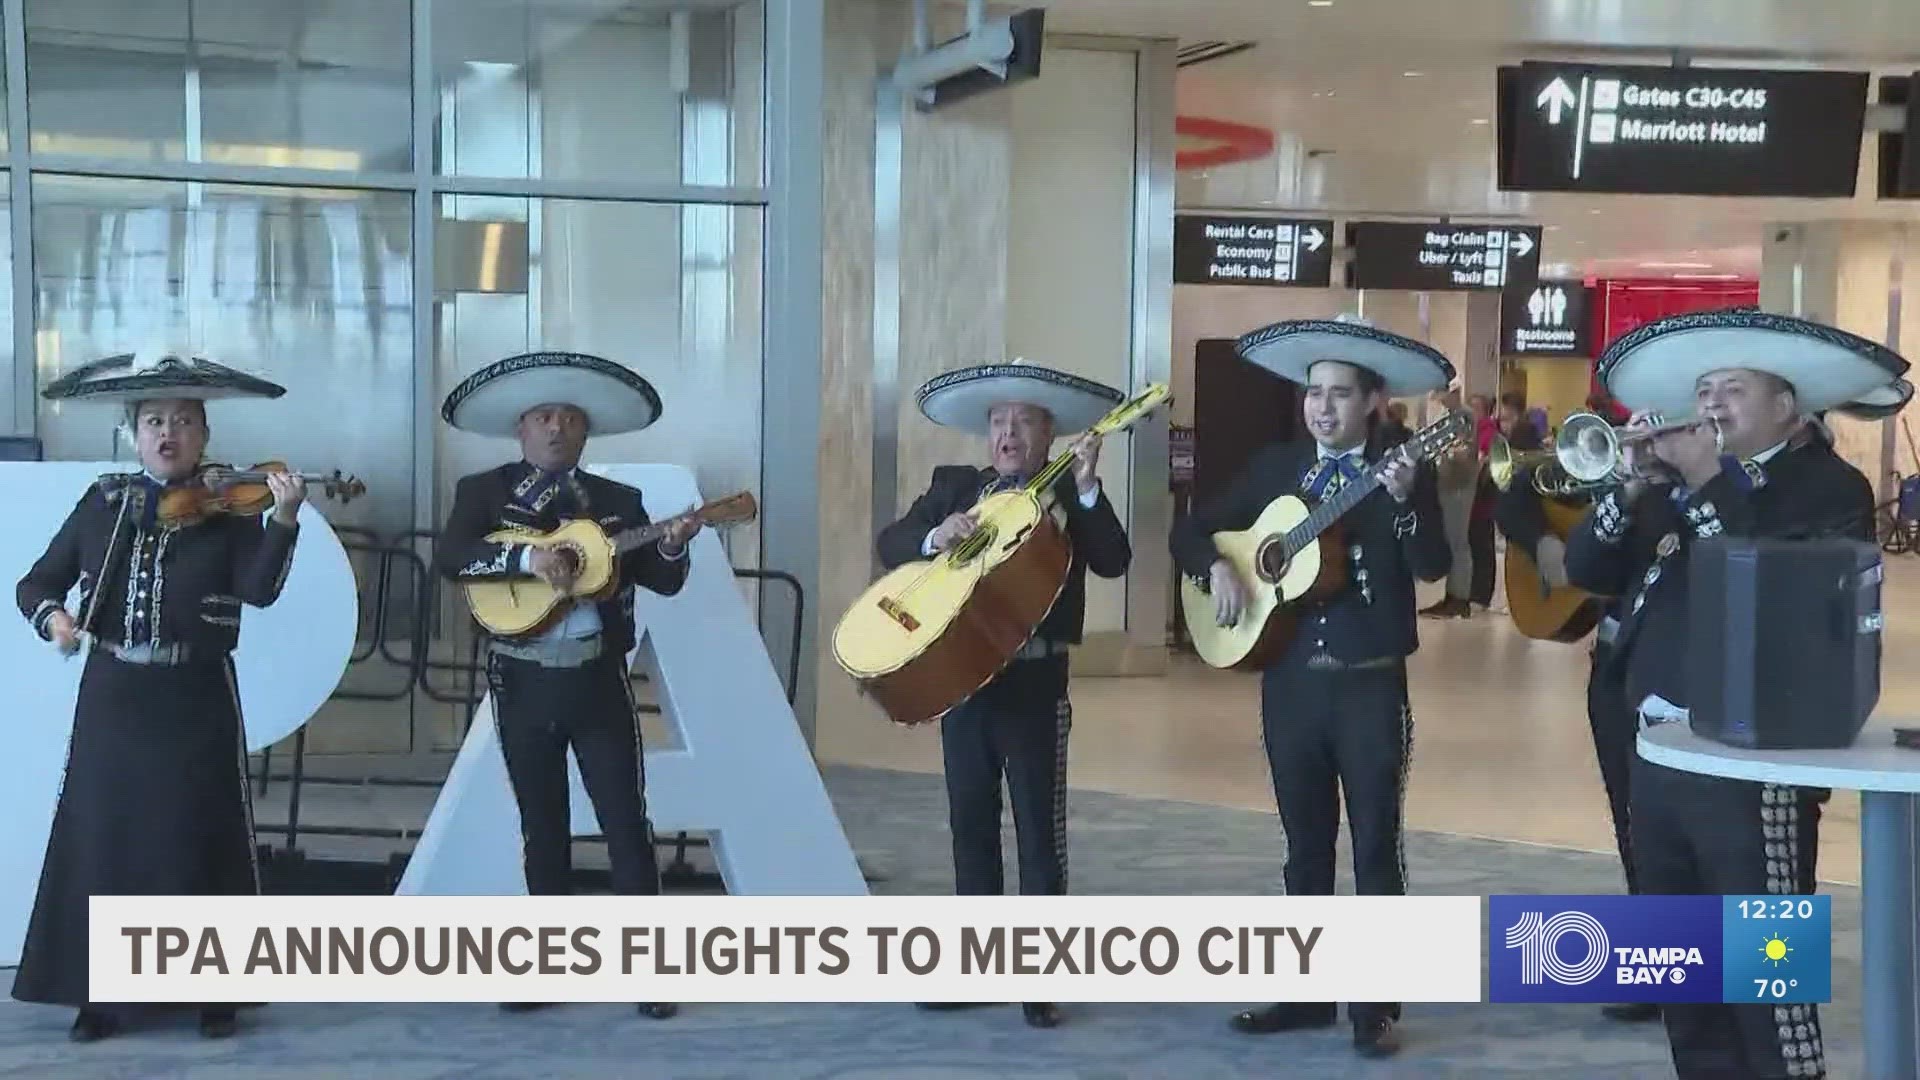 Aeromexico will begin direct service July 1st, marking the first nonstop flights between the two cities in nearly 30 years.